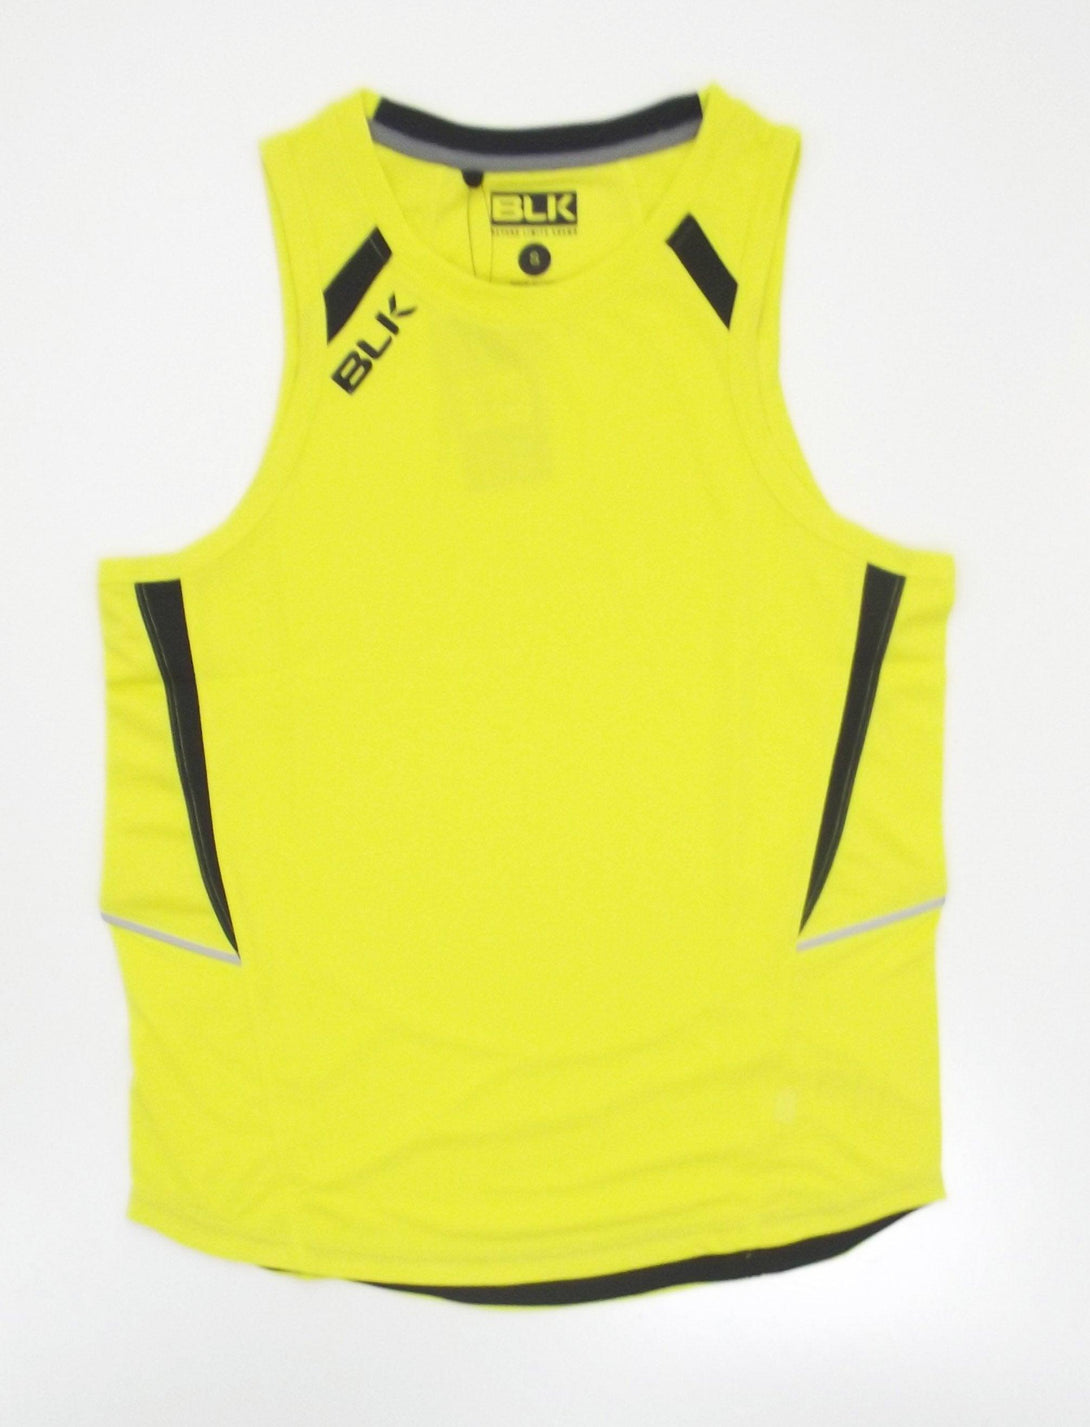 Rugby Heaven Blk Vapour Performance Adults Citrus Singlet - www.rugby-heaven.co.uk